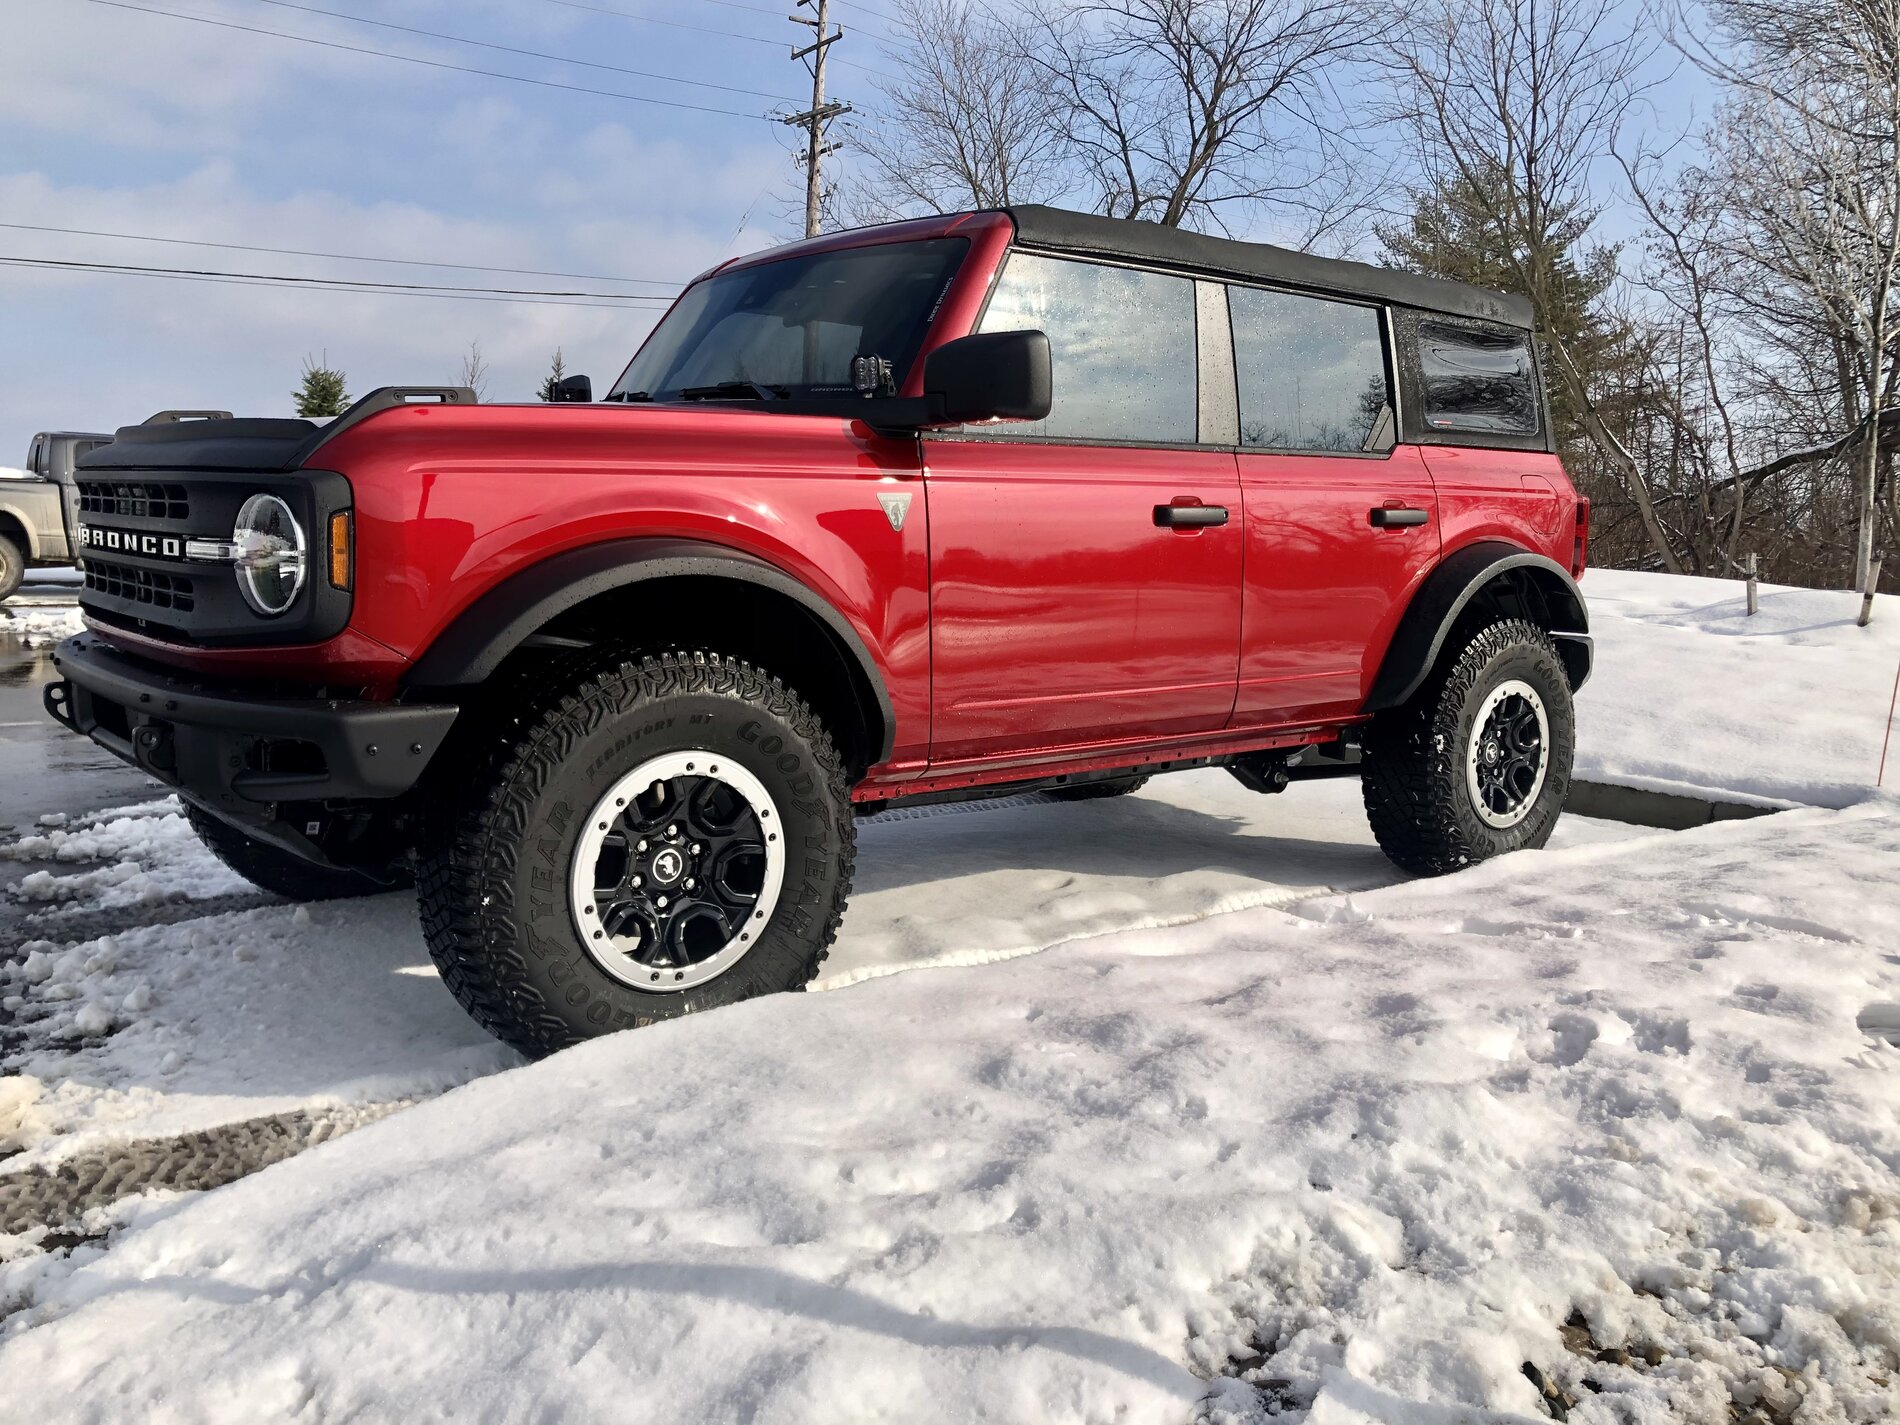 Ford Bronco After & Before. Tint 20% & Ditch lights, Aero skin. Freshly washed to remove salt. "My mamma always said, Salt is the Devil" IMG-2213